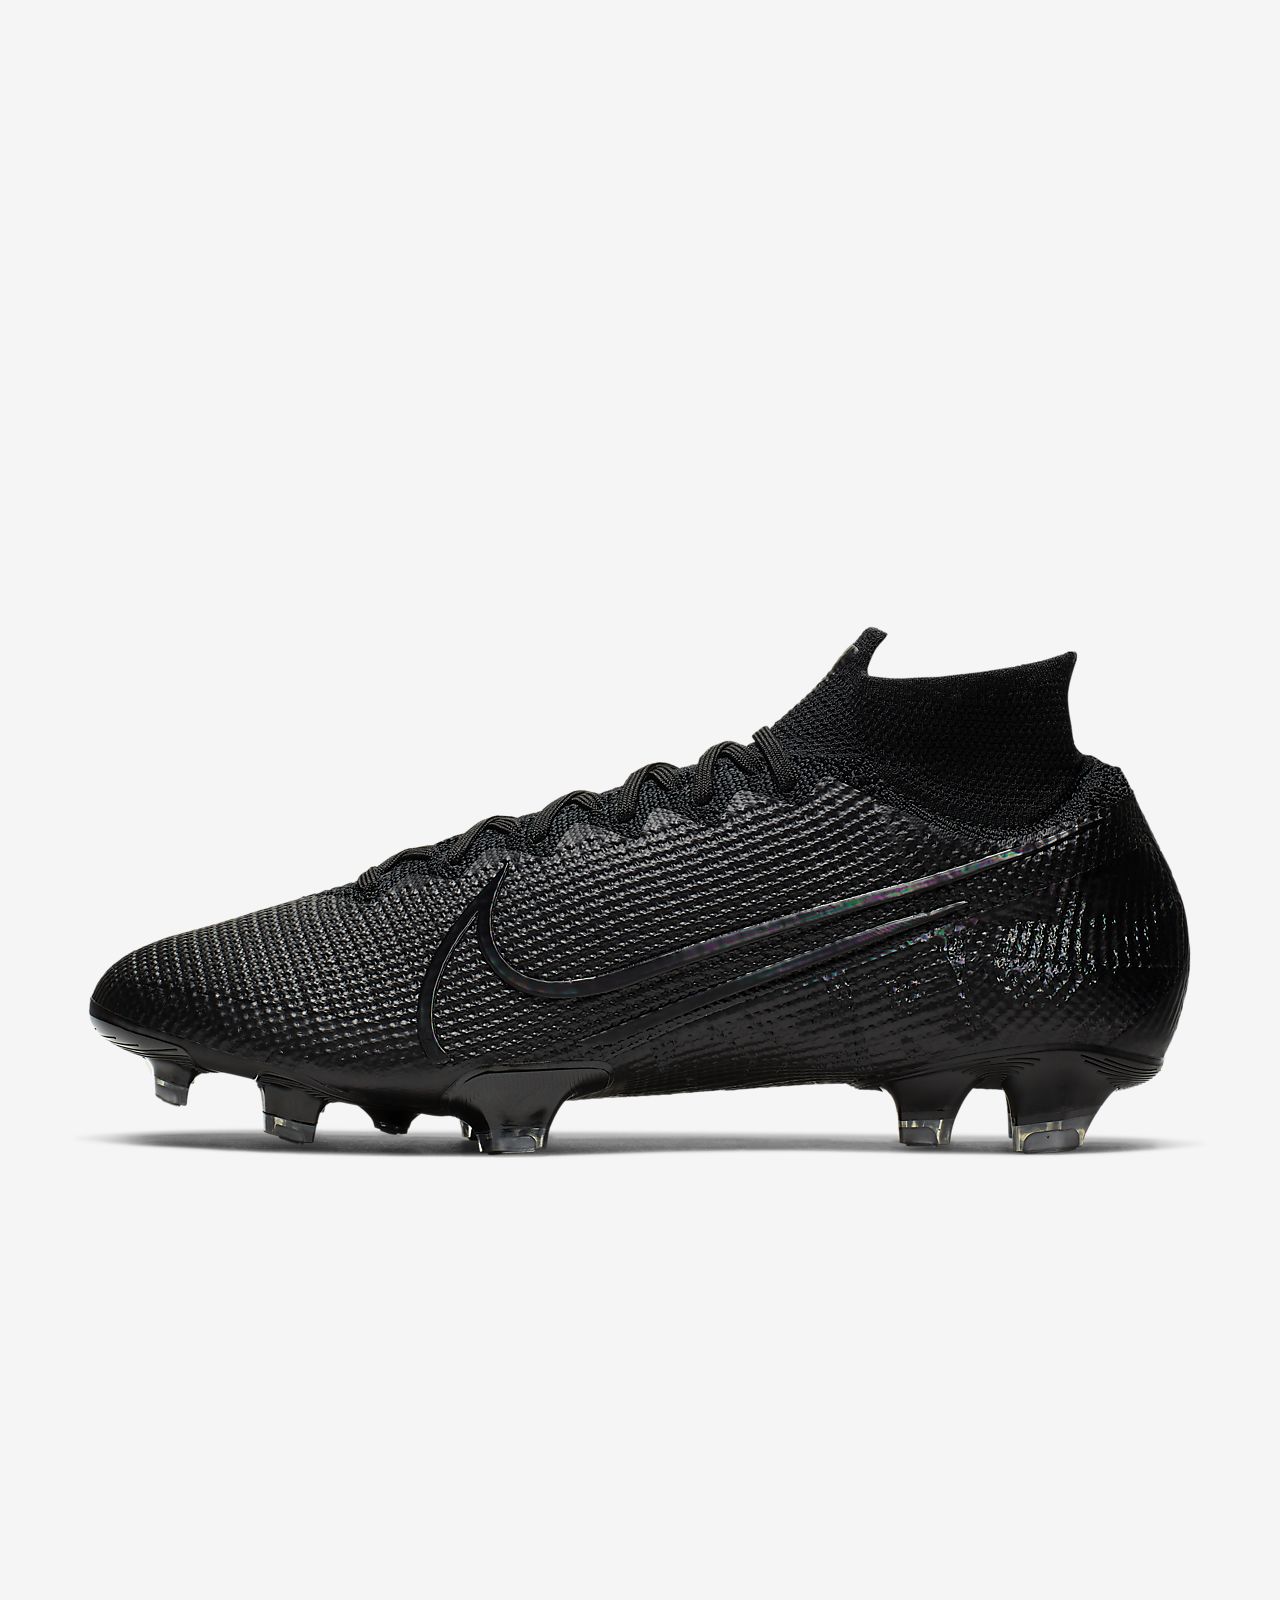 Nike Mercurial Vapor 12 (Black Lux Pack) Unboxing, Review & On